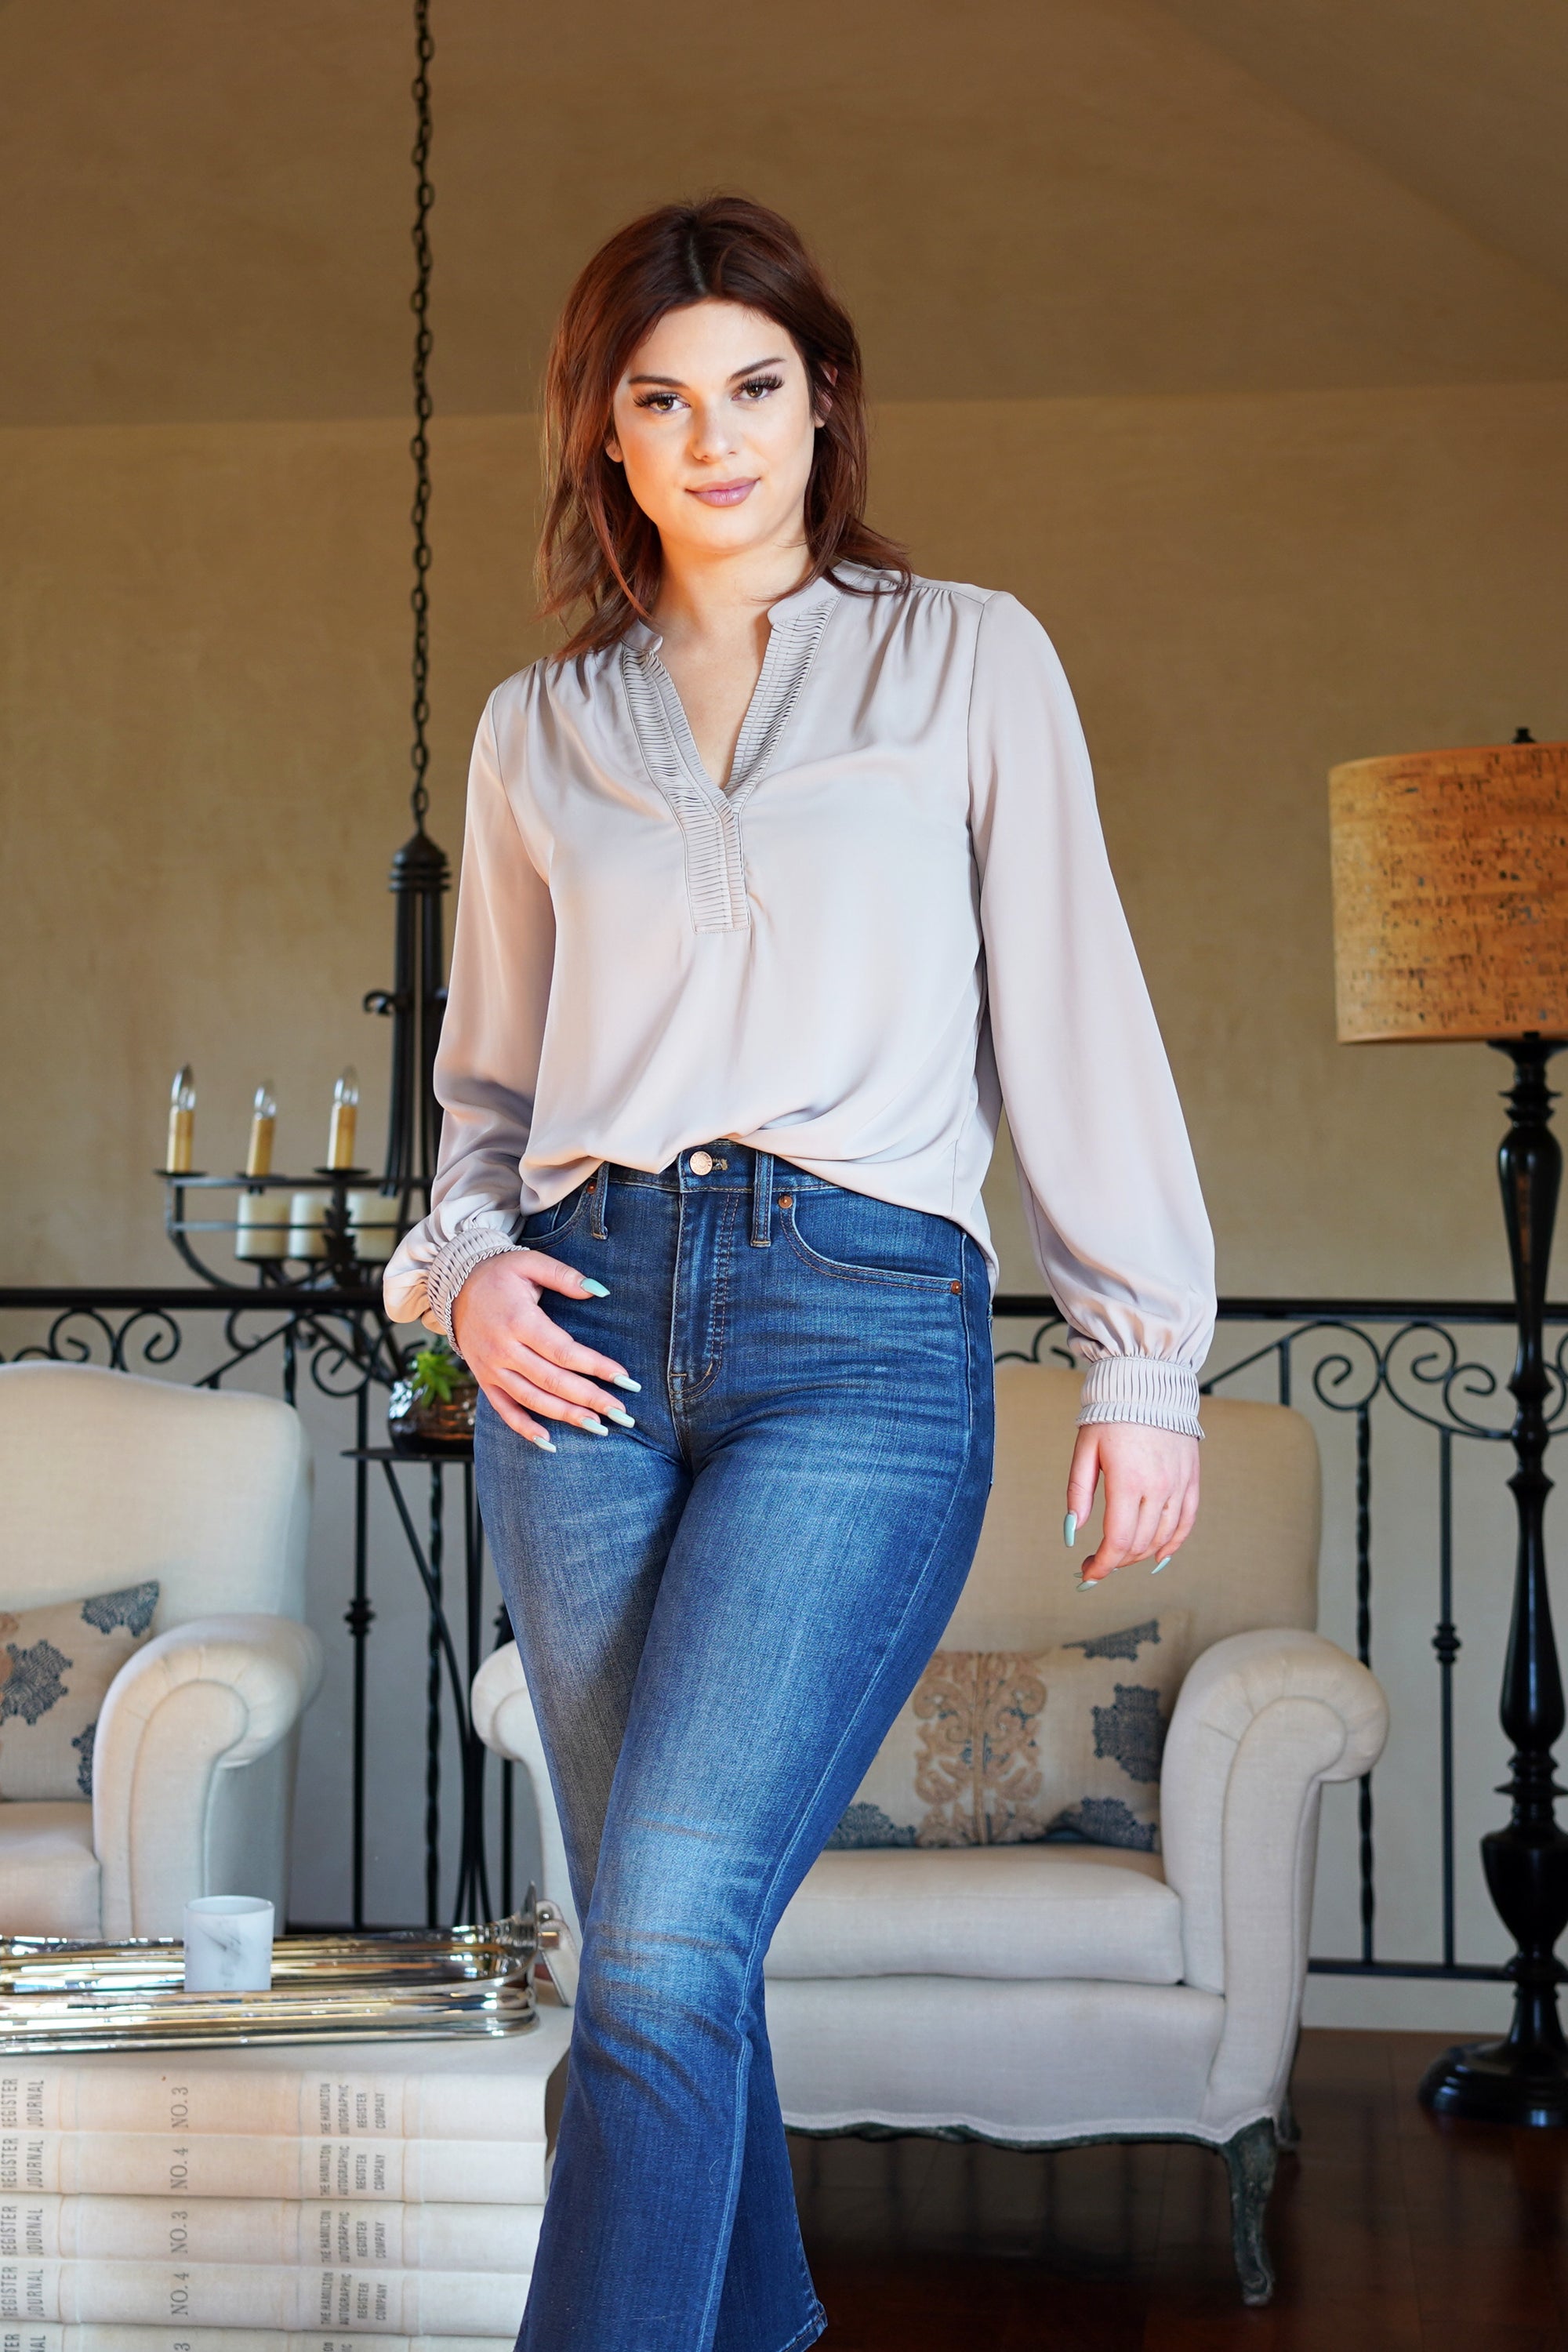 The "Office" Blouse - The Flaunt